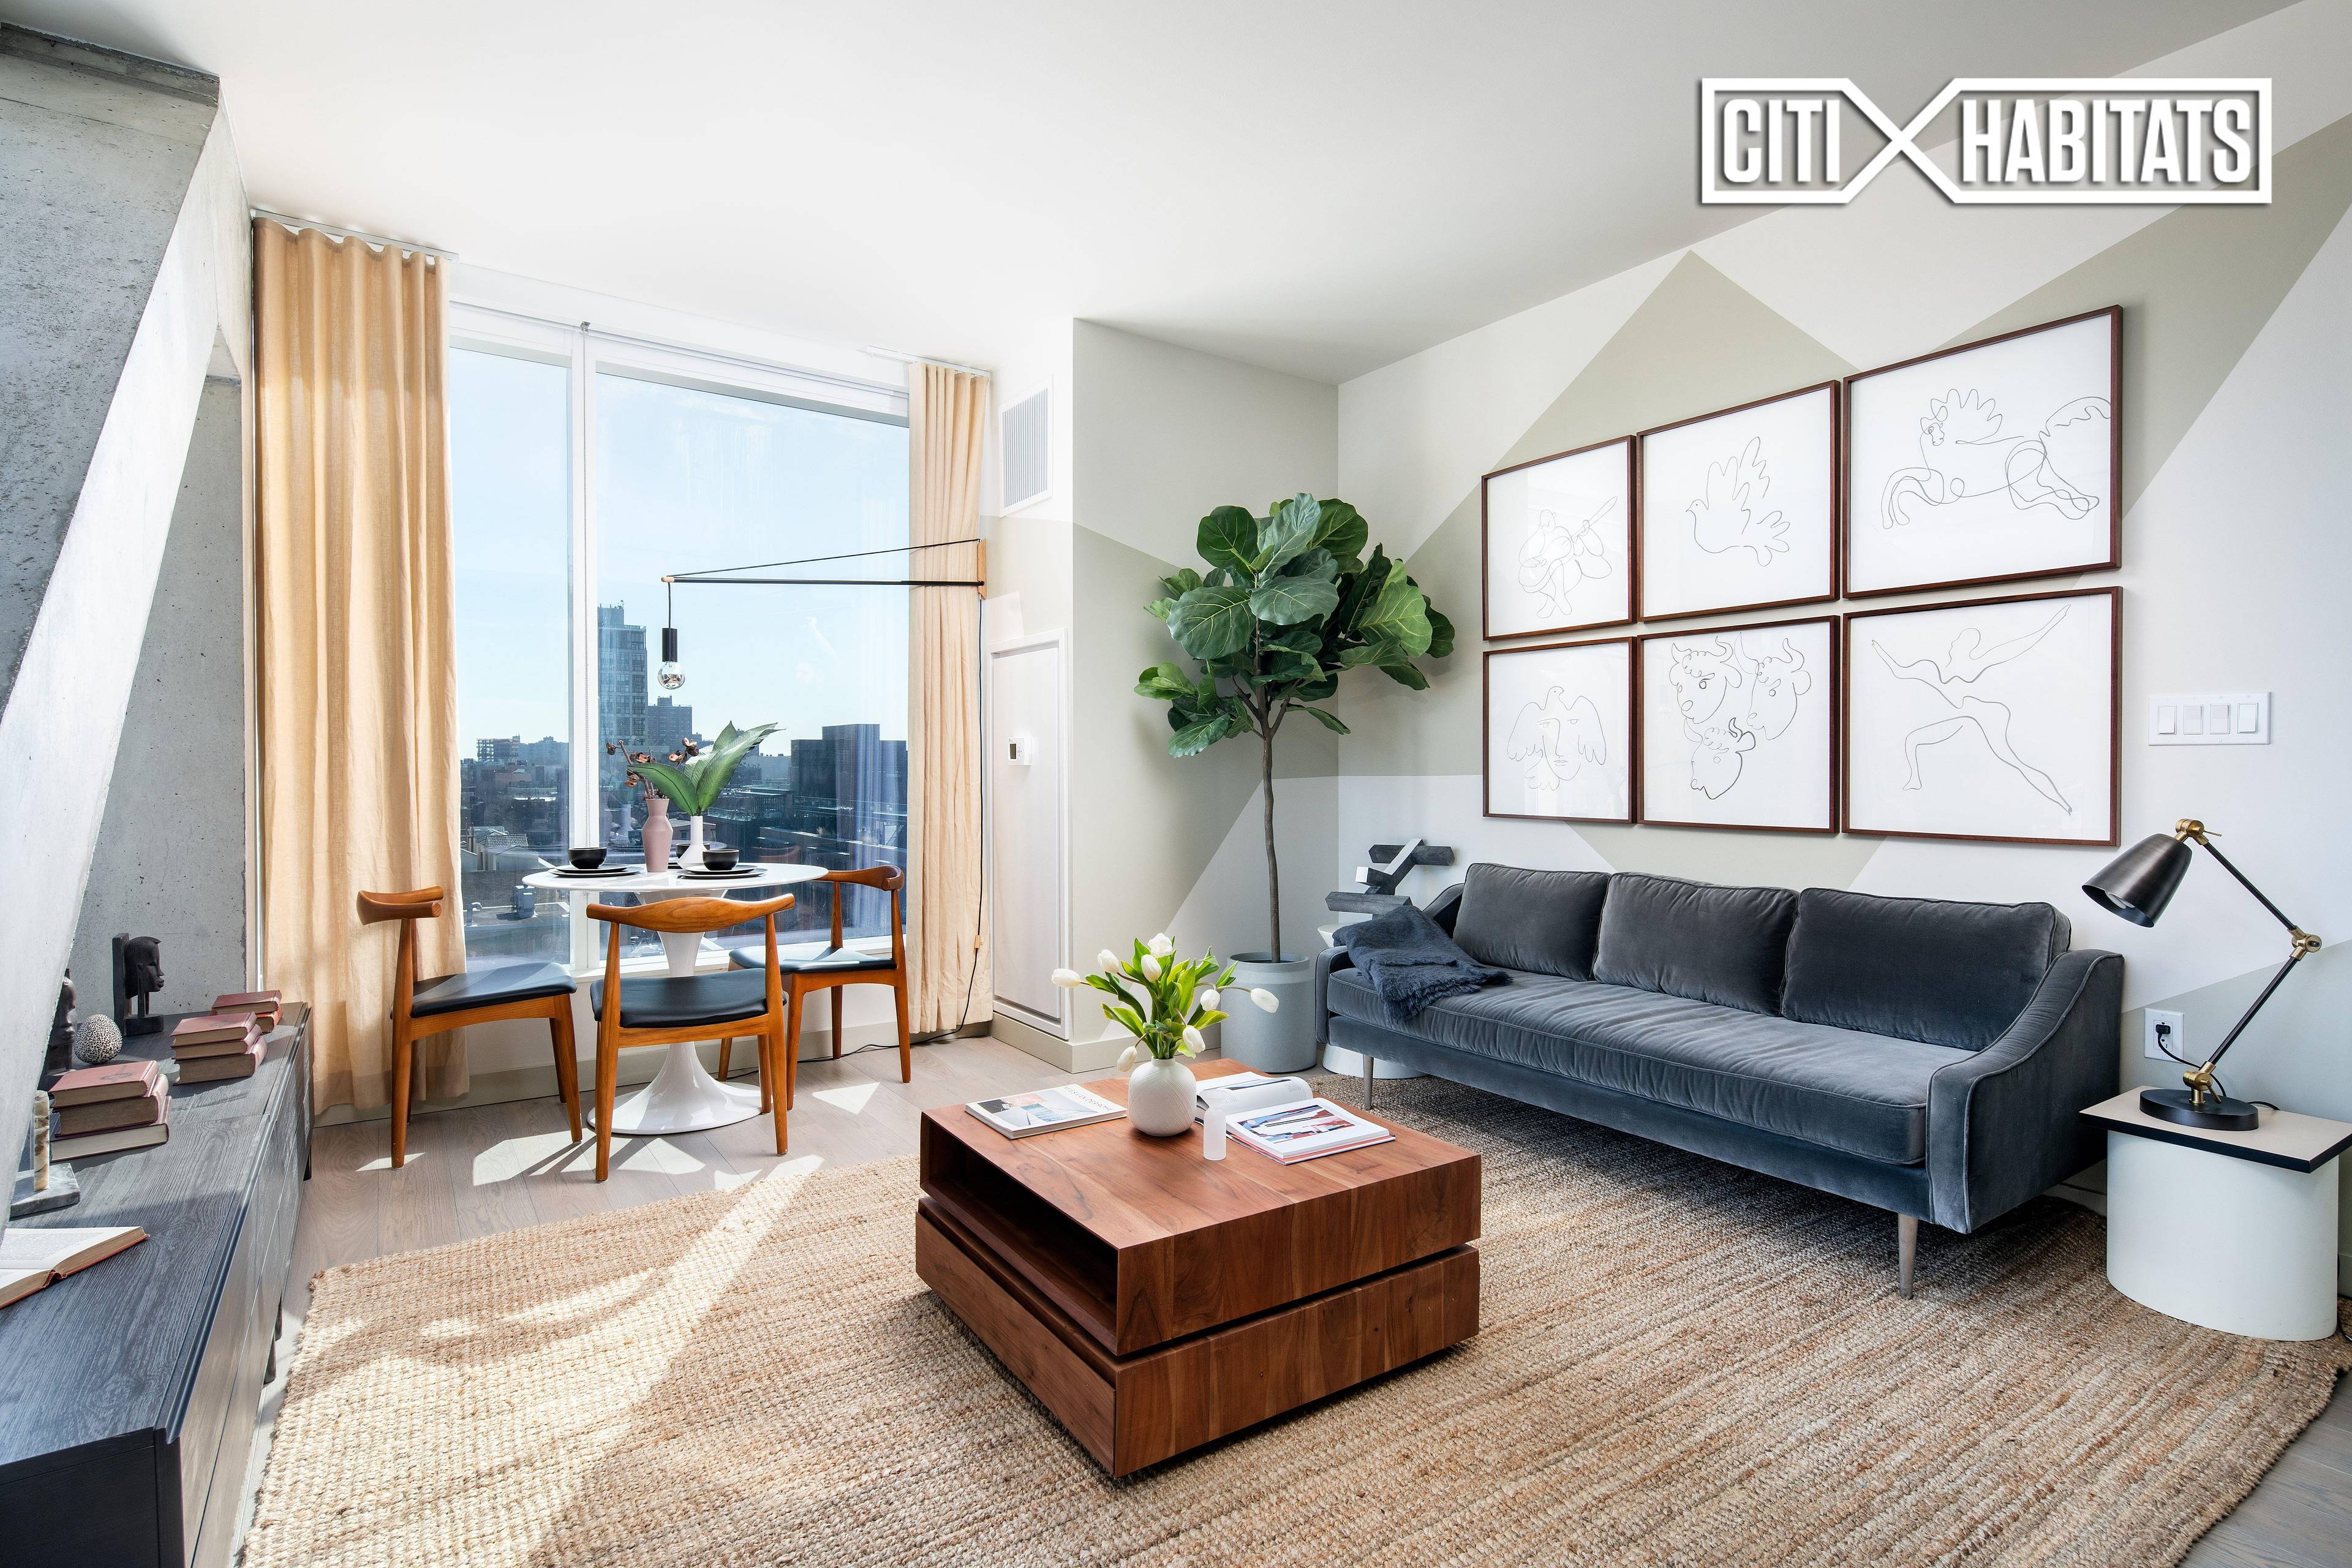 420 Kent Phase 2. Staycation RefinedOne Bedroom Home OfficeThe best architecture, with the best views, in the best neighborhood.